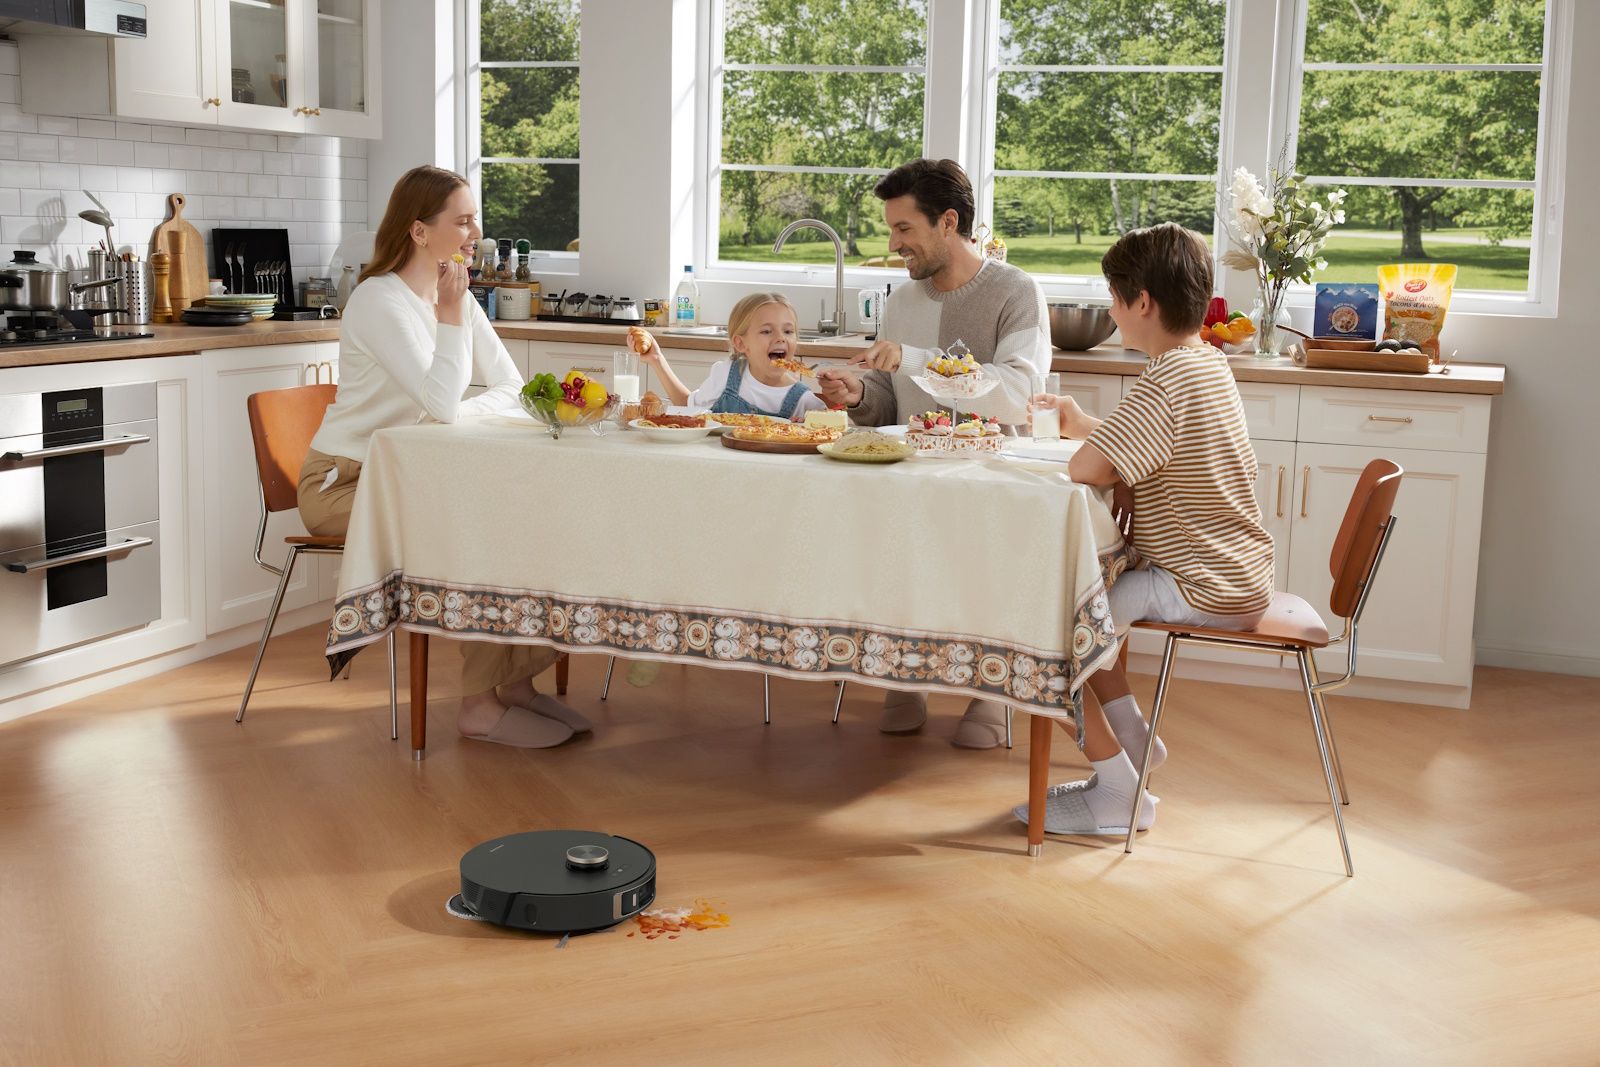 dreamebot l20 ultra on floor cleaning mess with family eating at table